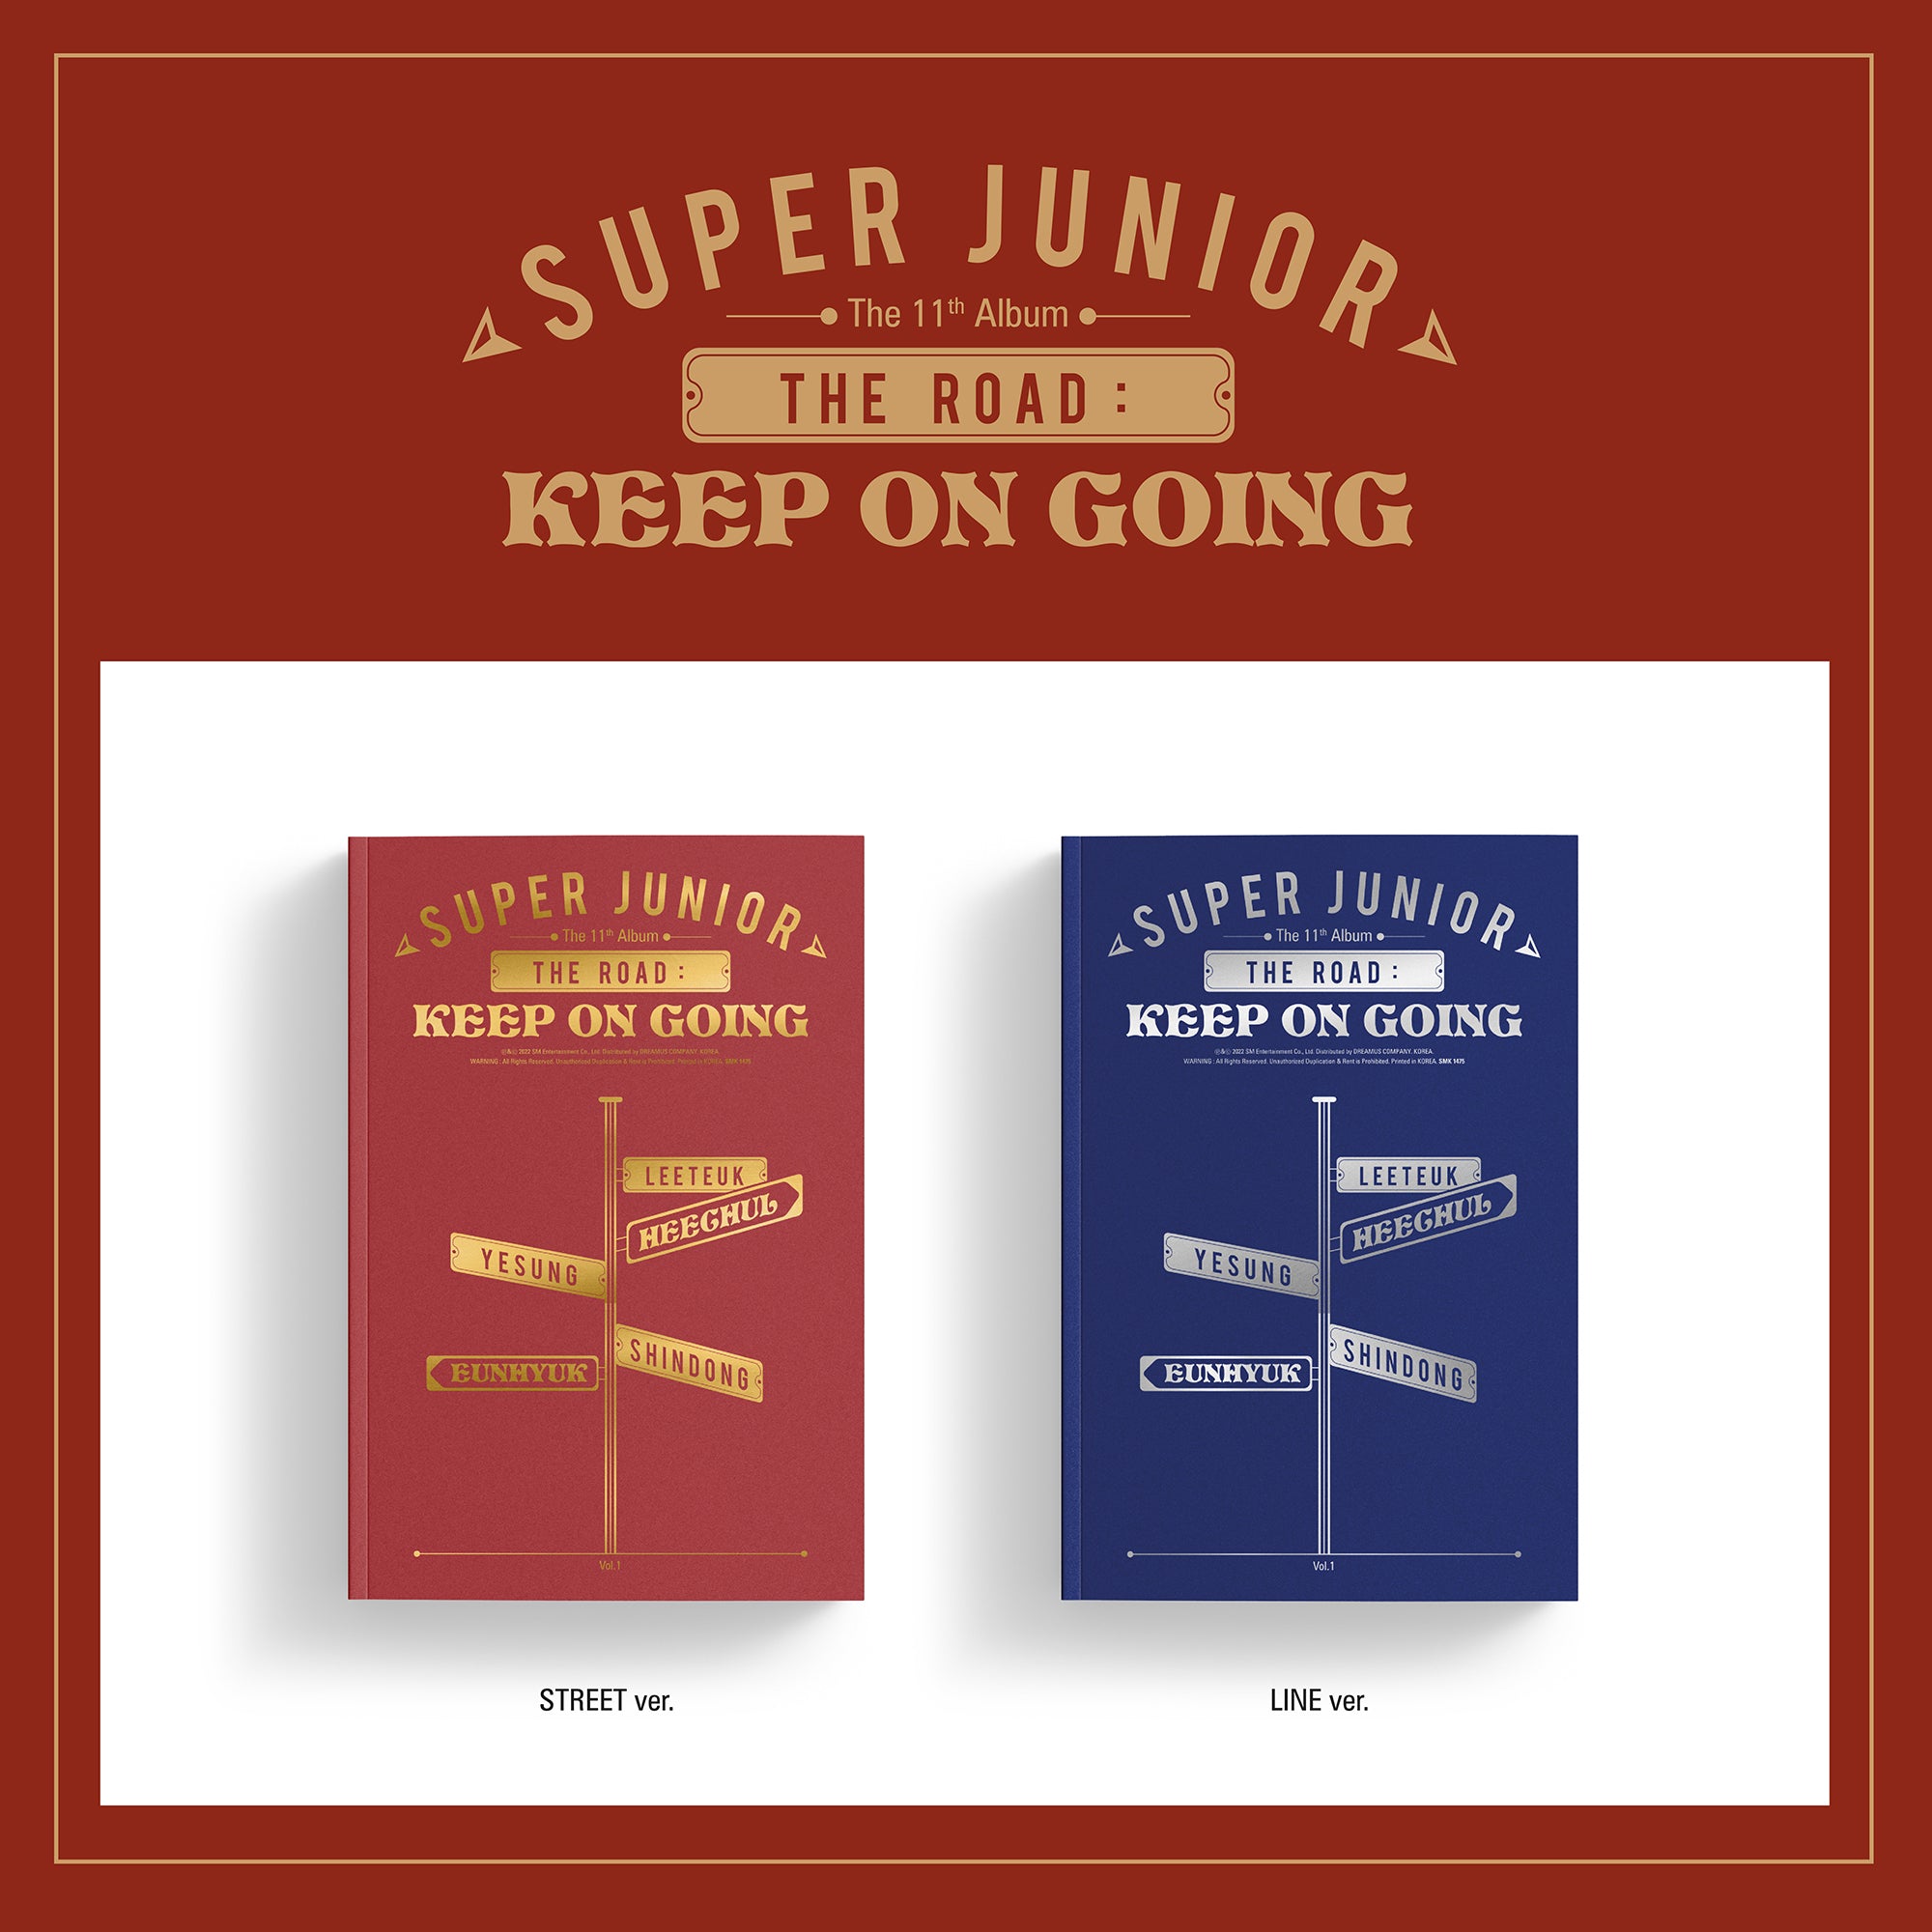 SUPER JUNIOR 11TH ALBUM VOL. 1 'THE ROAD : KEEP ON GOING' COVER